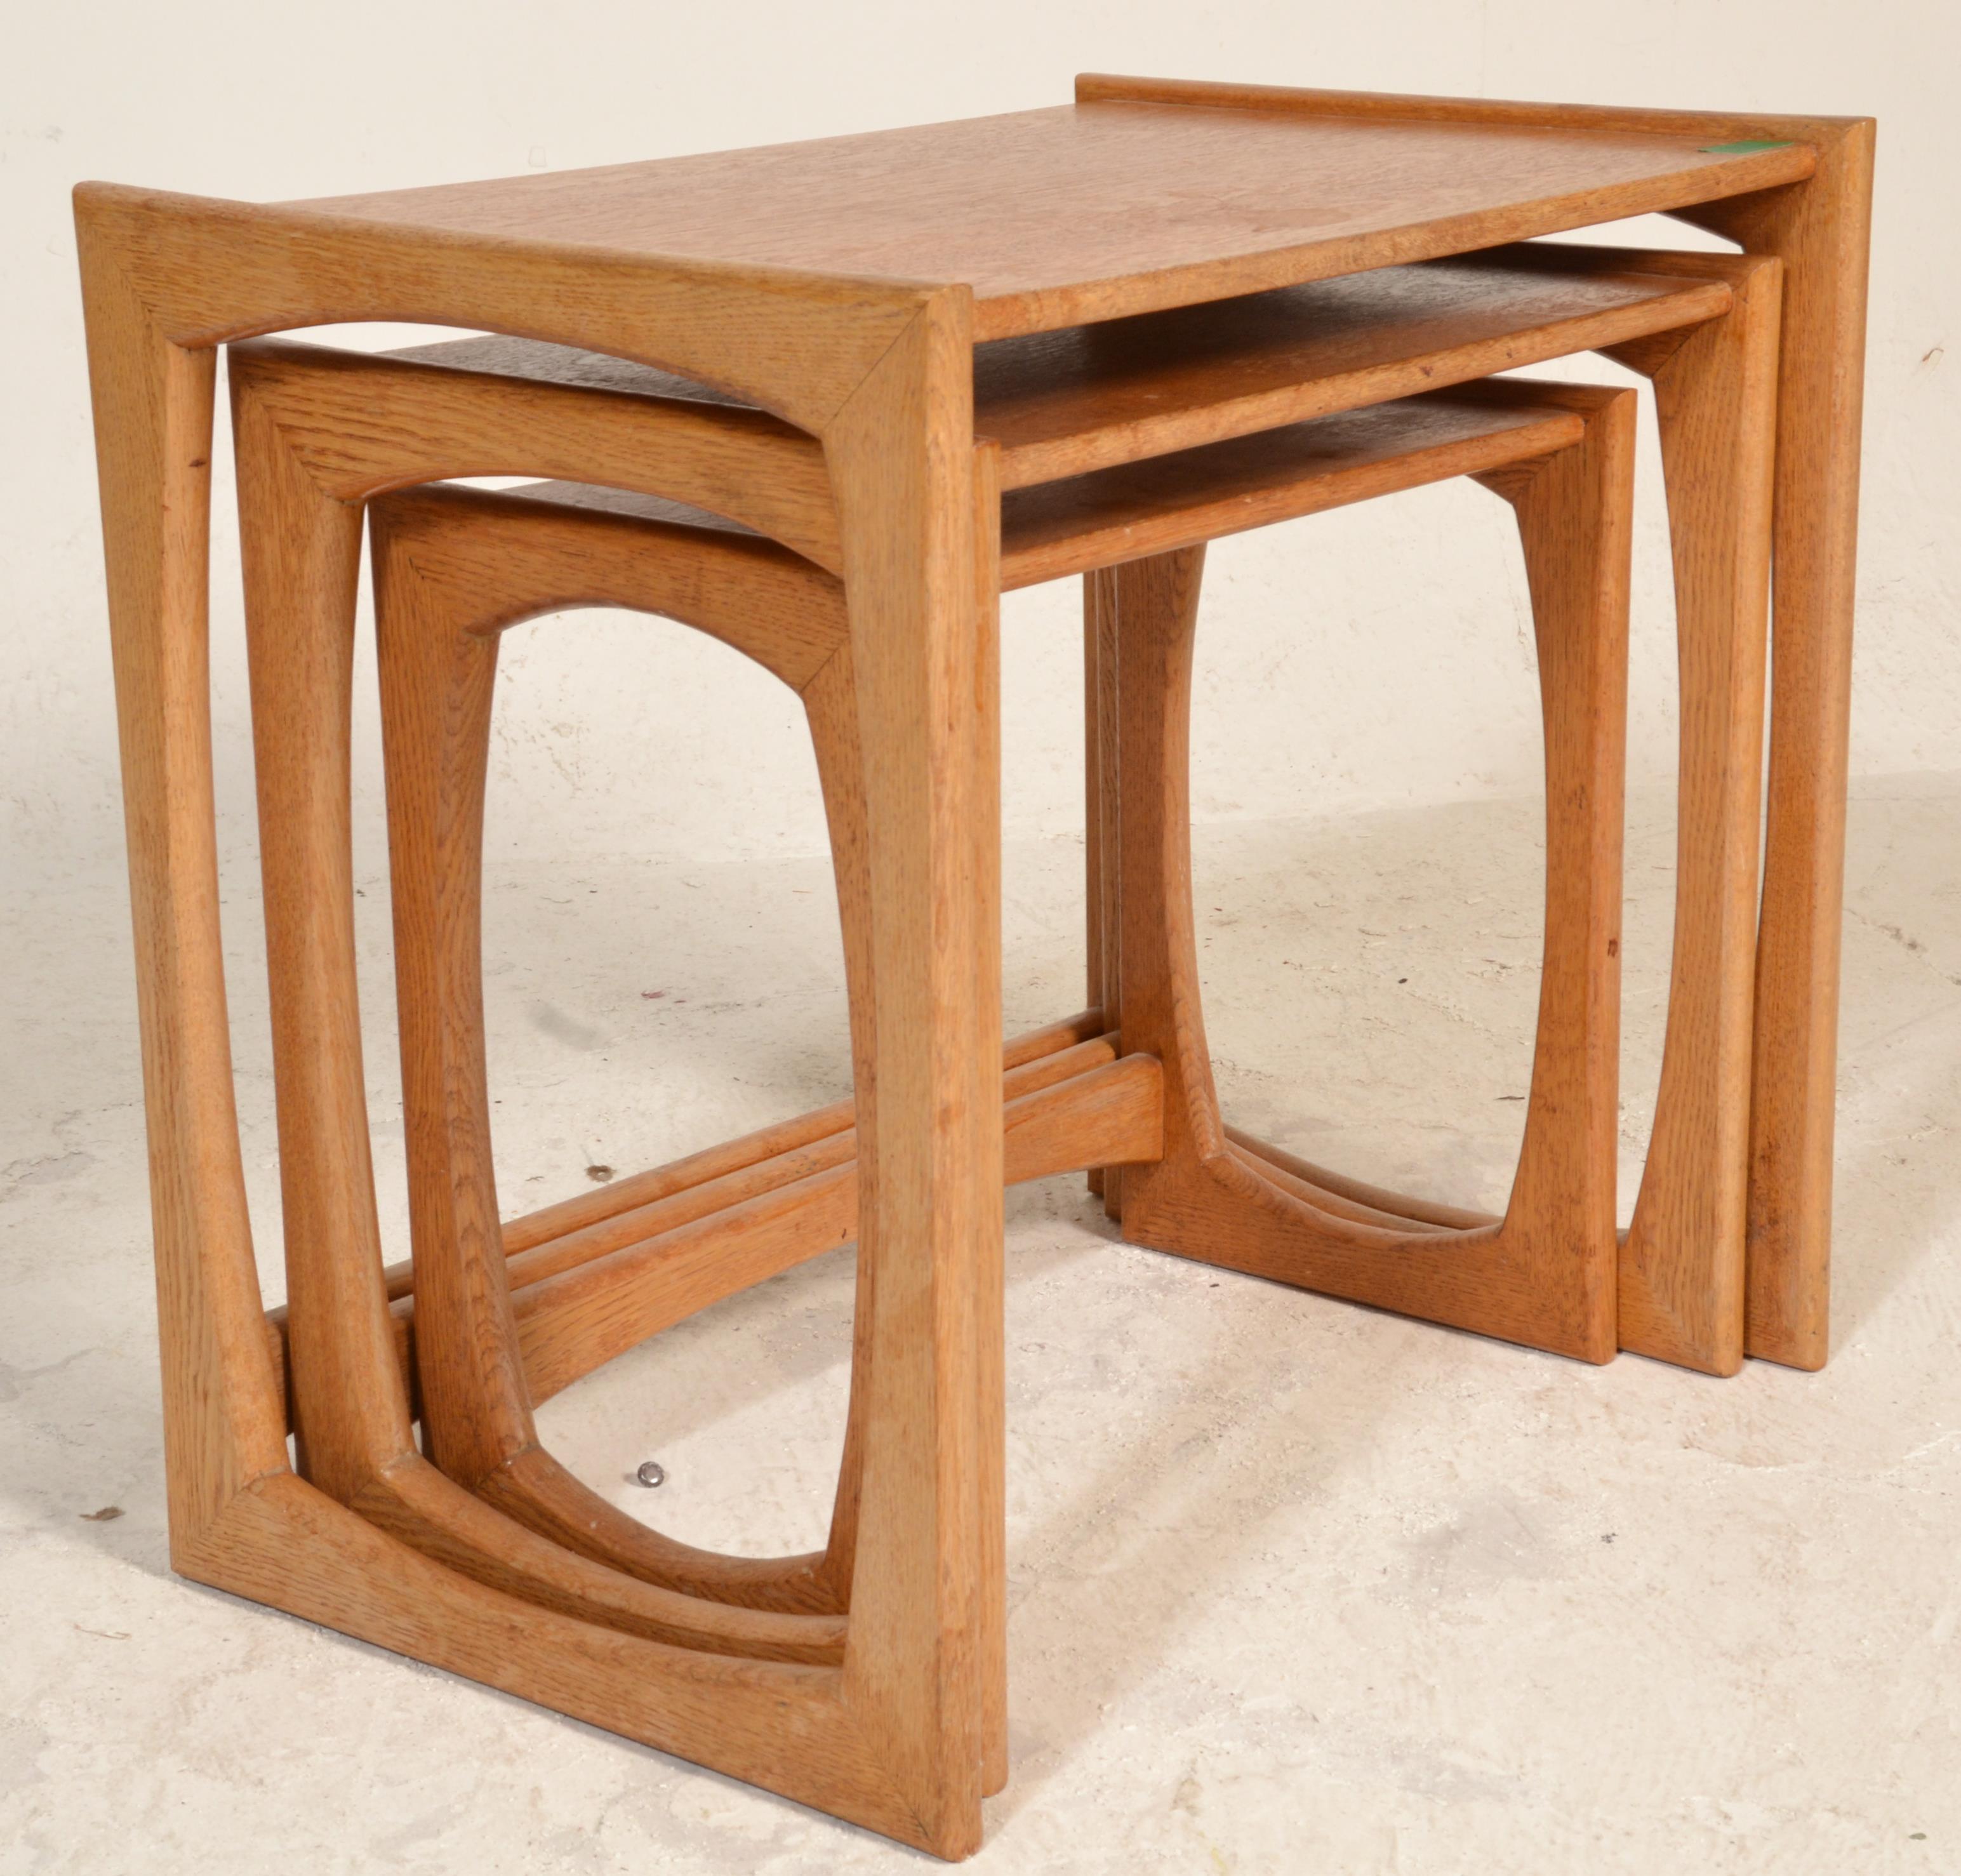 A 1970's G-Plan oak quadrille pattern nest of tables being raised on squared legs with shaped